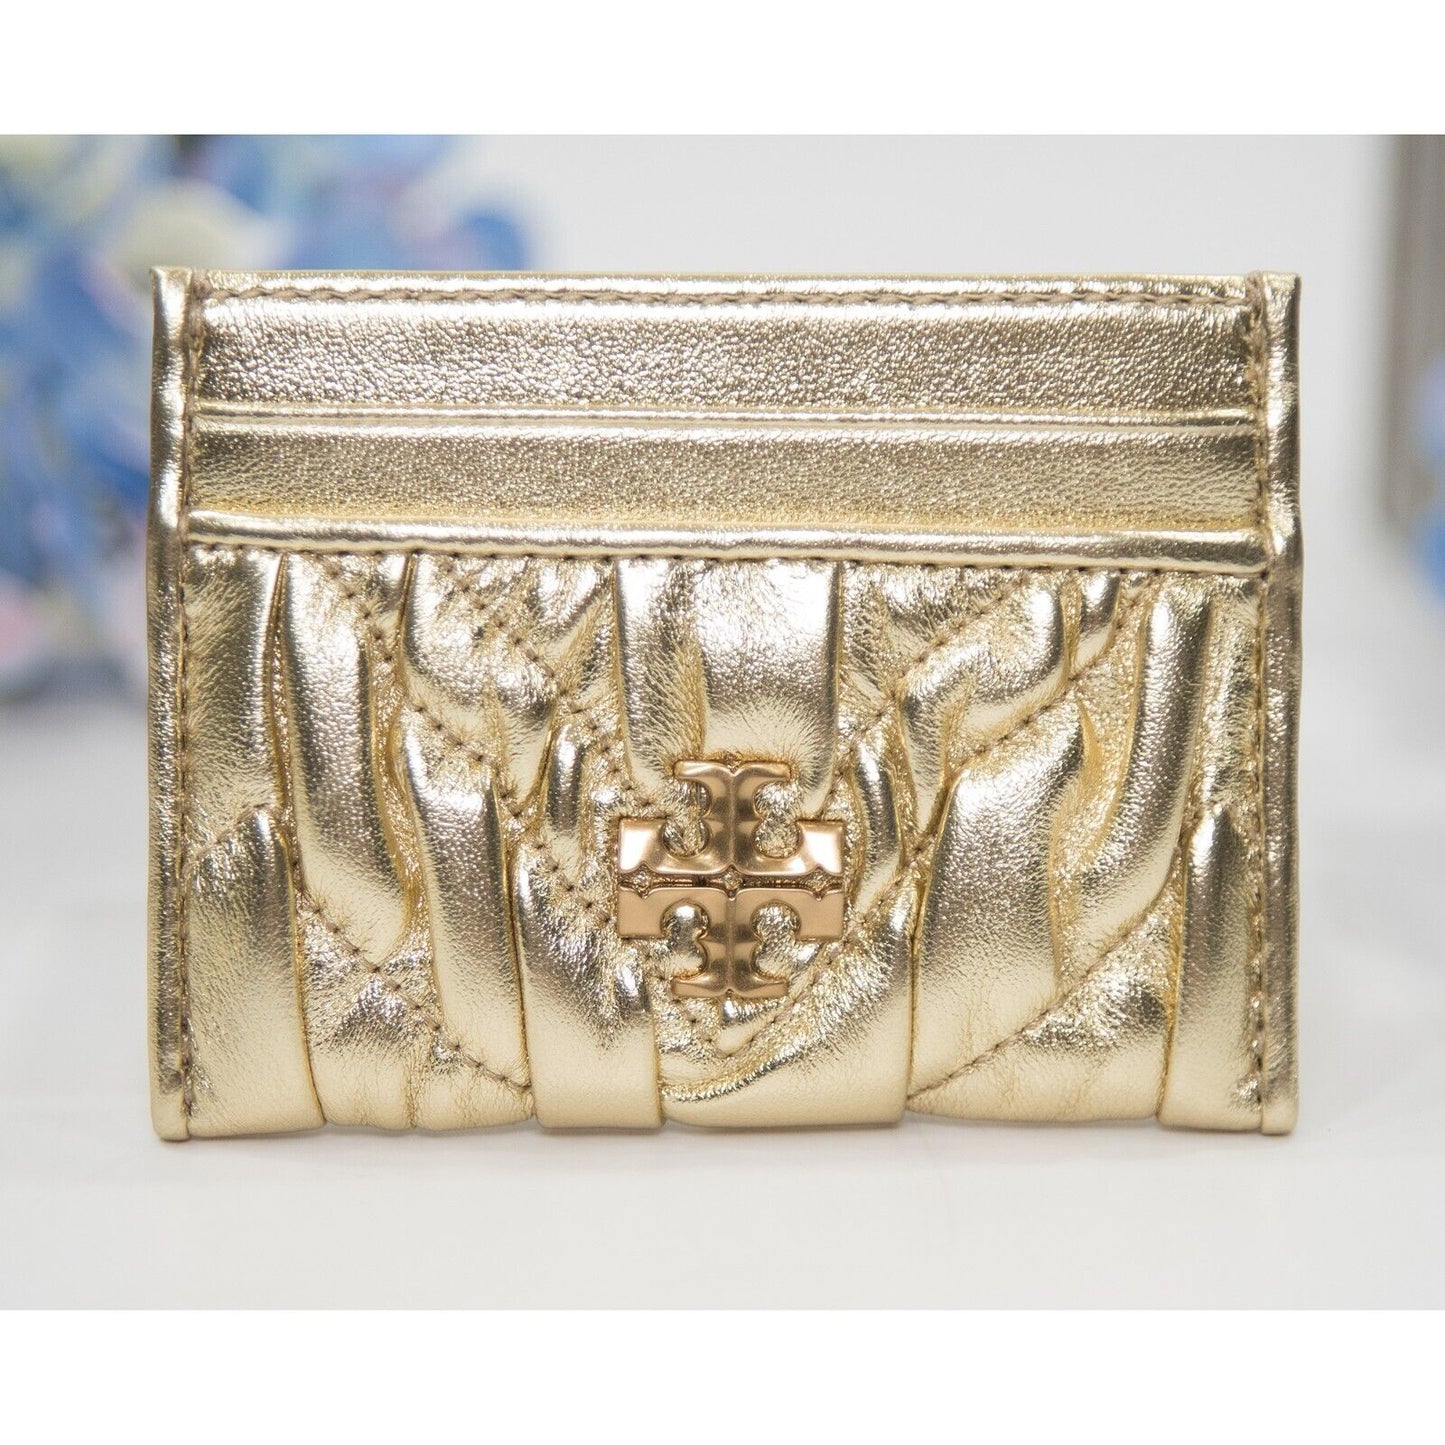 Tory Burch Gold Metallic Ruched Leather Kira Quilted Card Case Mini Wallet NWT